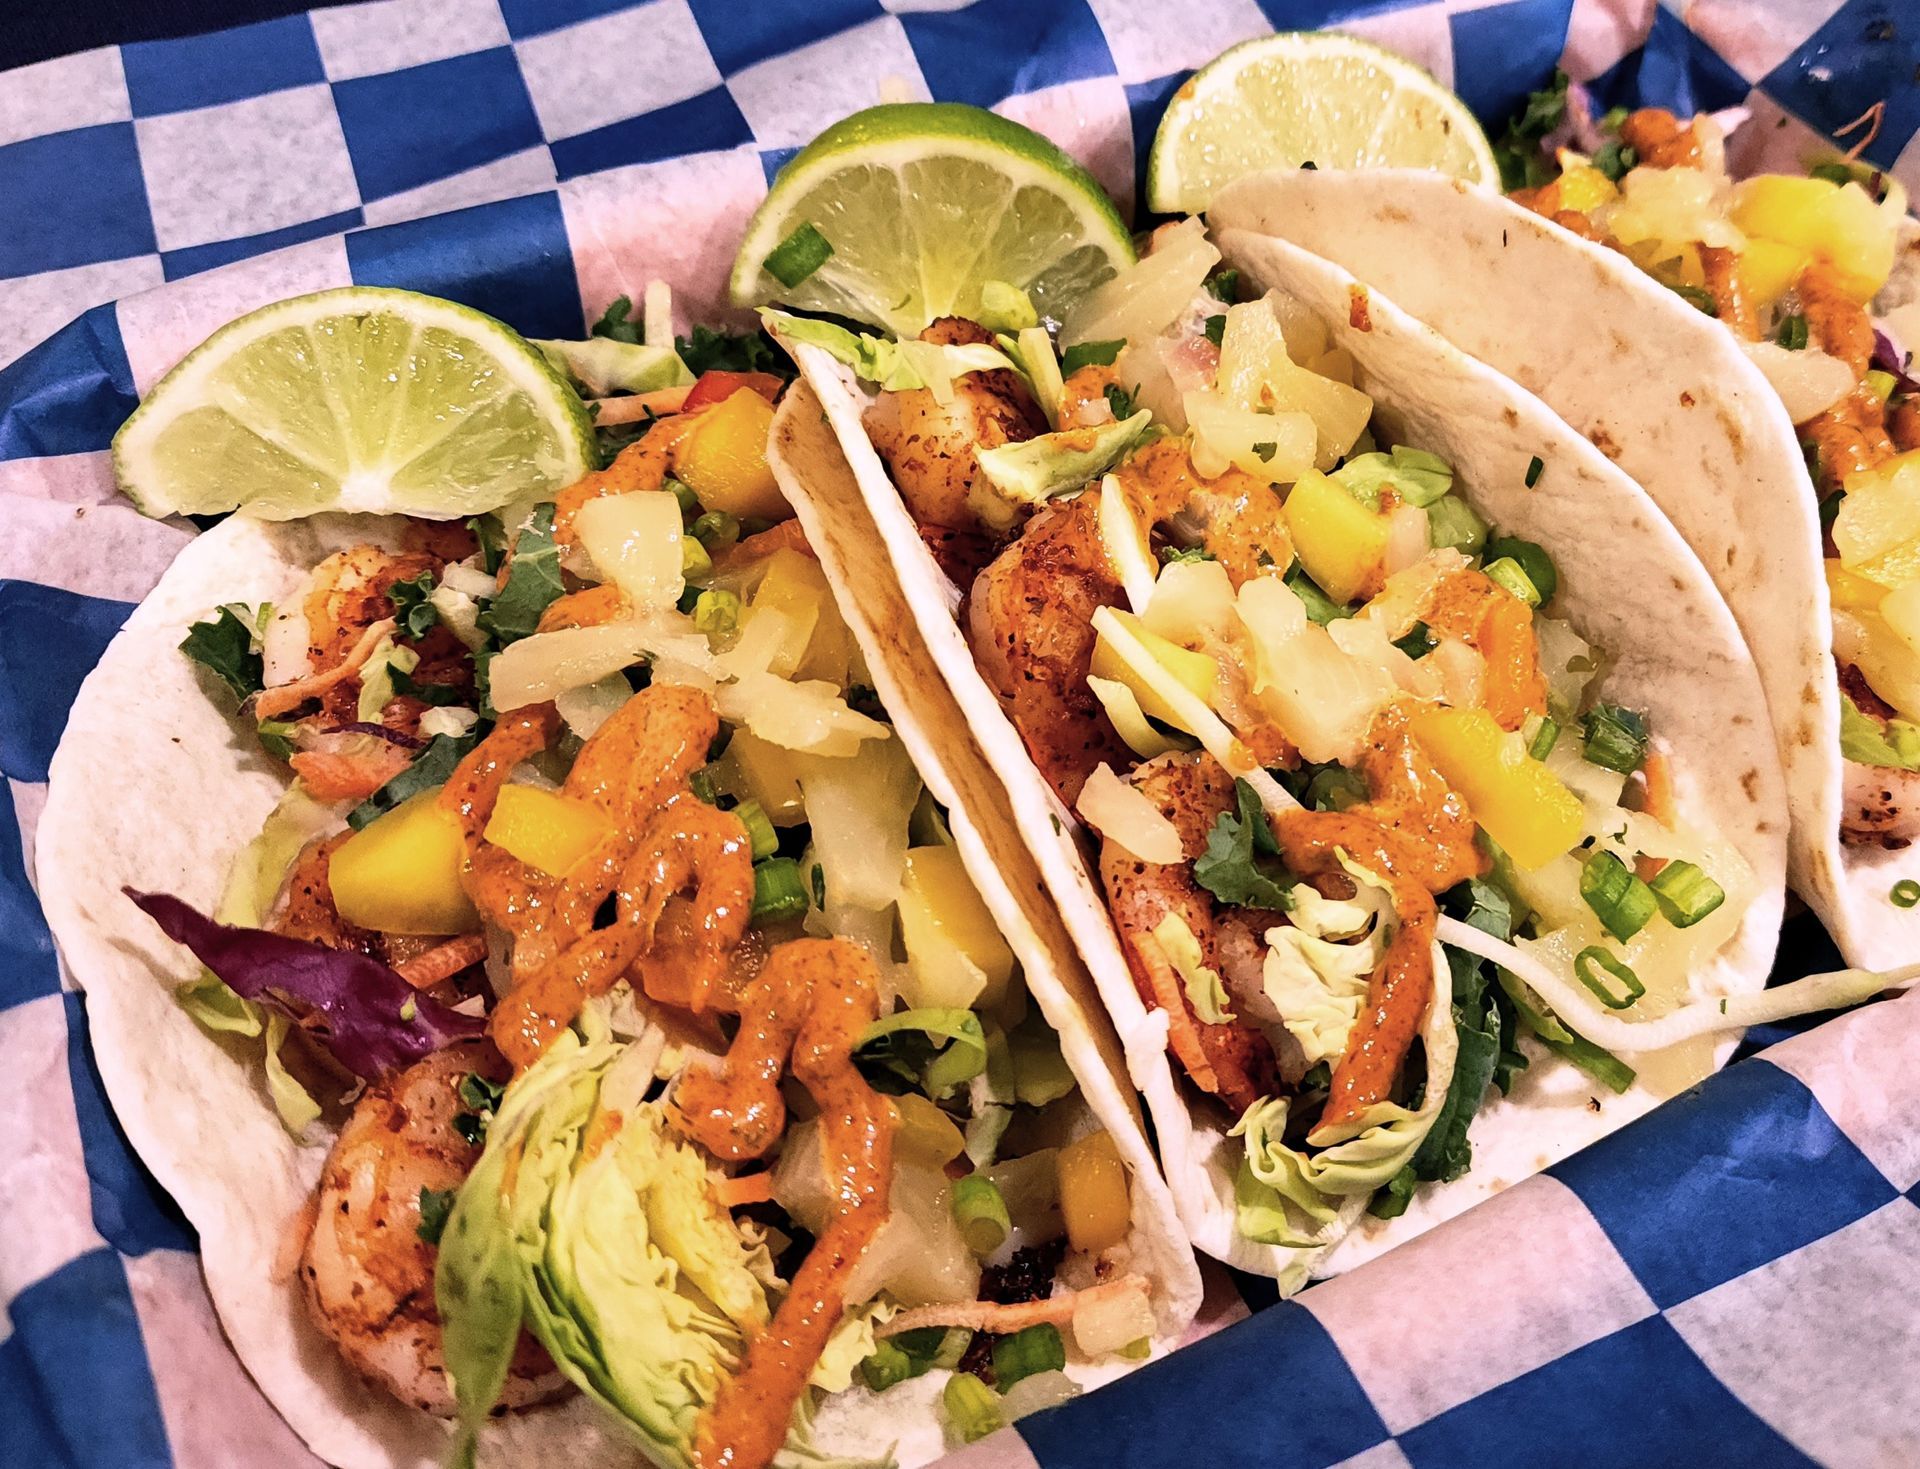 shrimp and lobster tacos are always a bay favorite